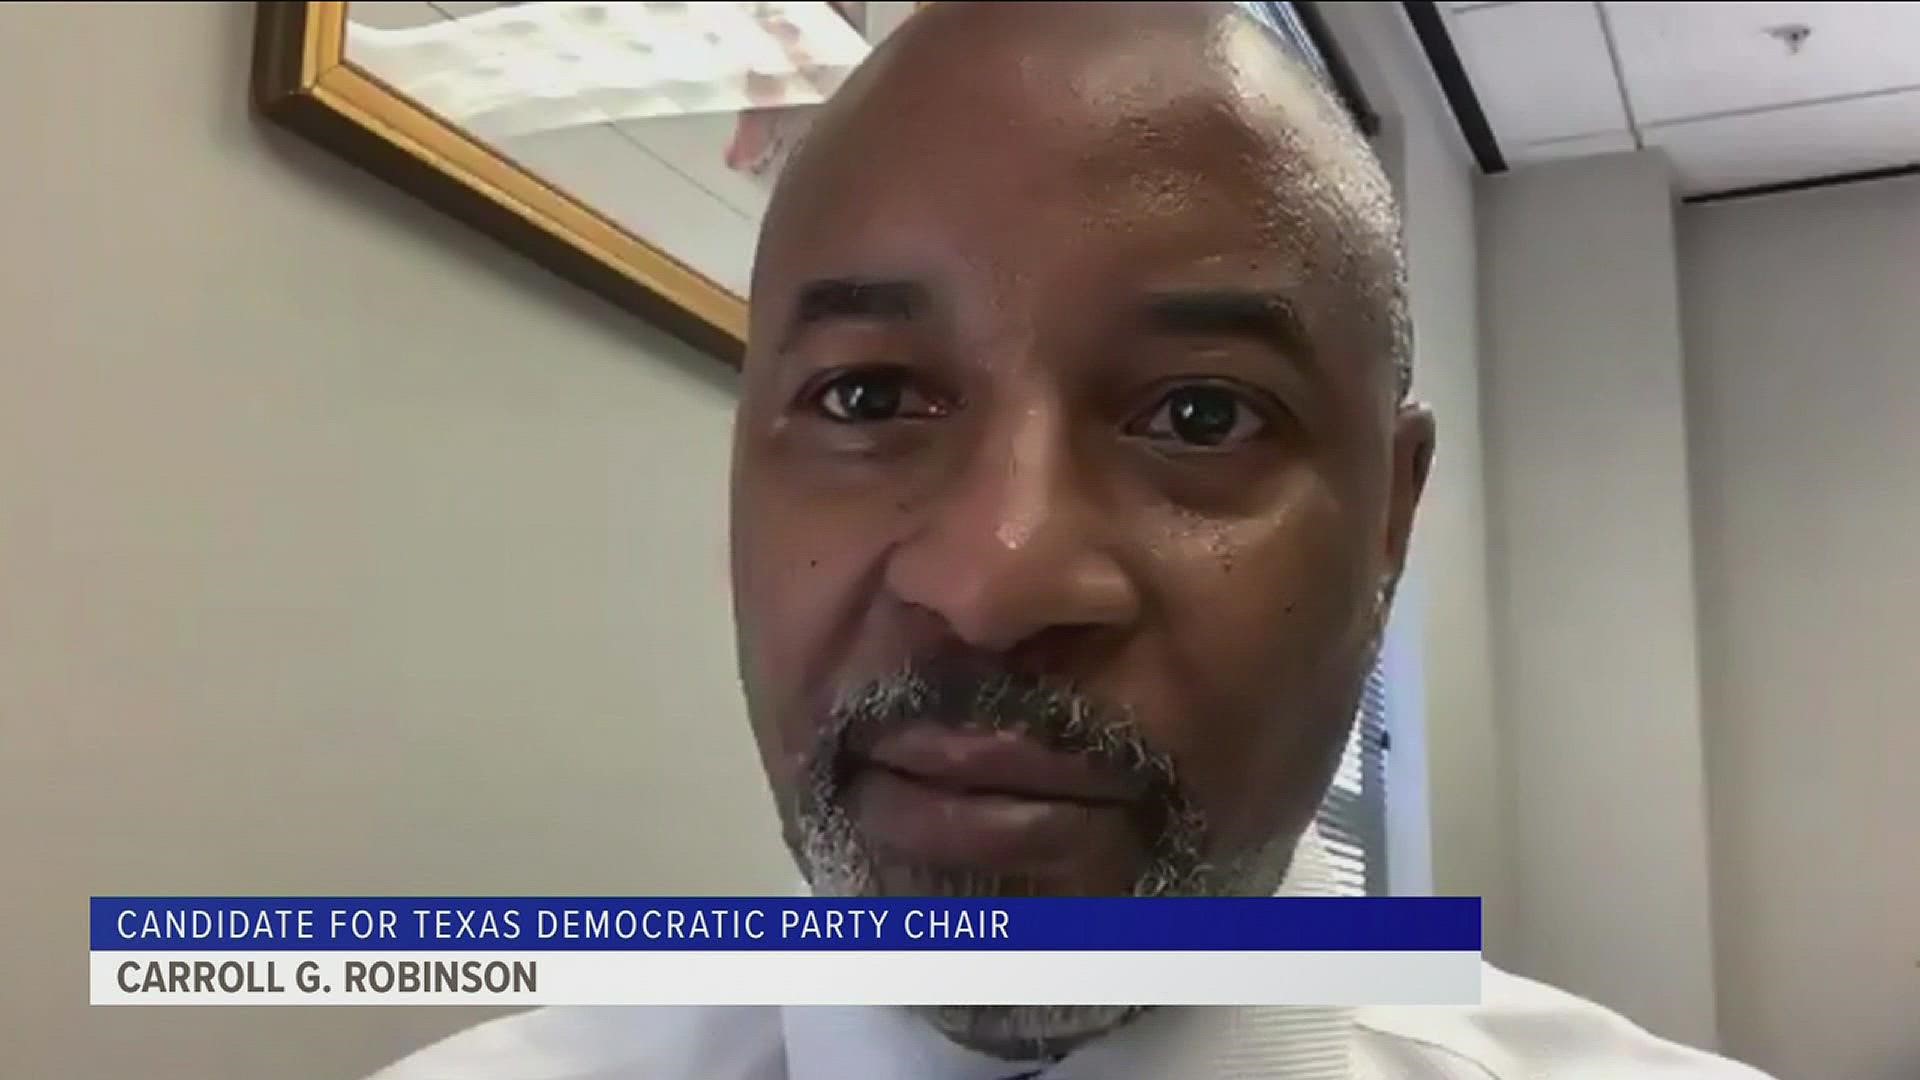 He says he’s running because he believes he has a better solution. And Robinson describes his approach as rebuilding the party from the bottom up.